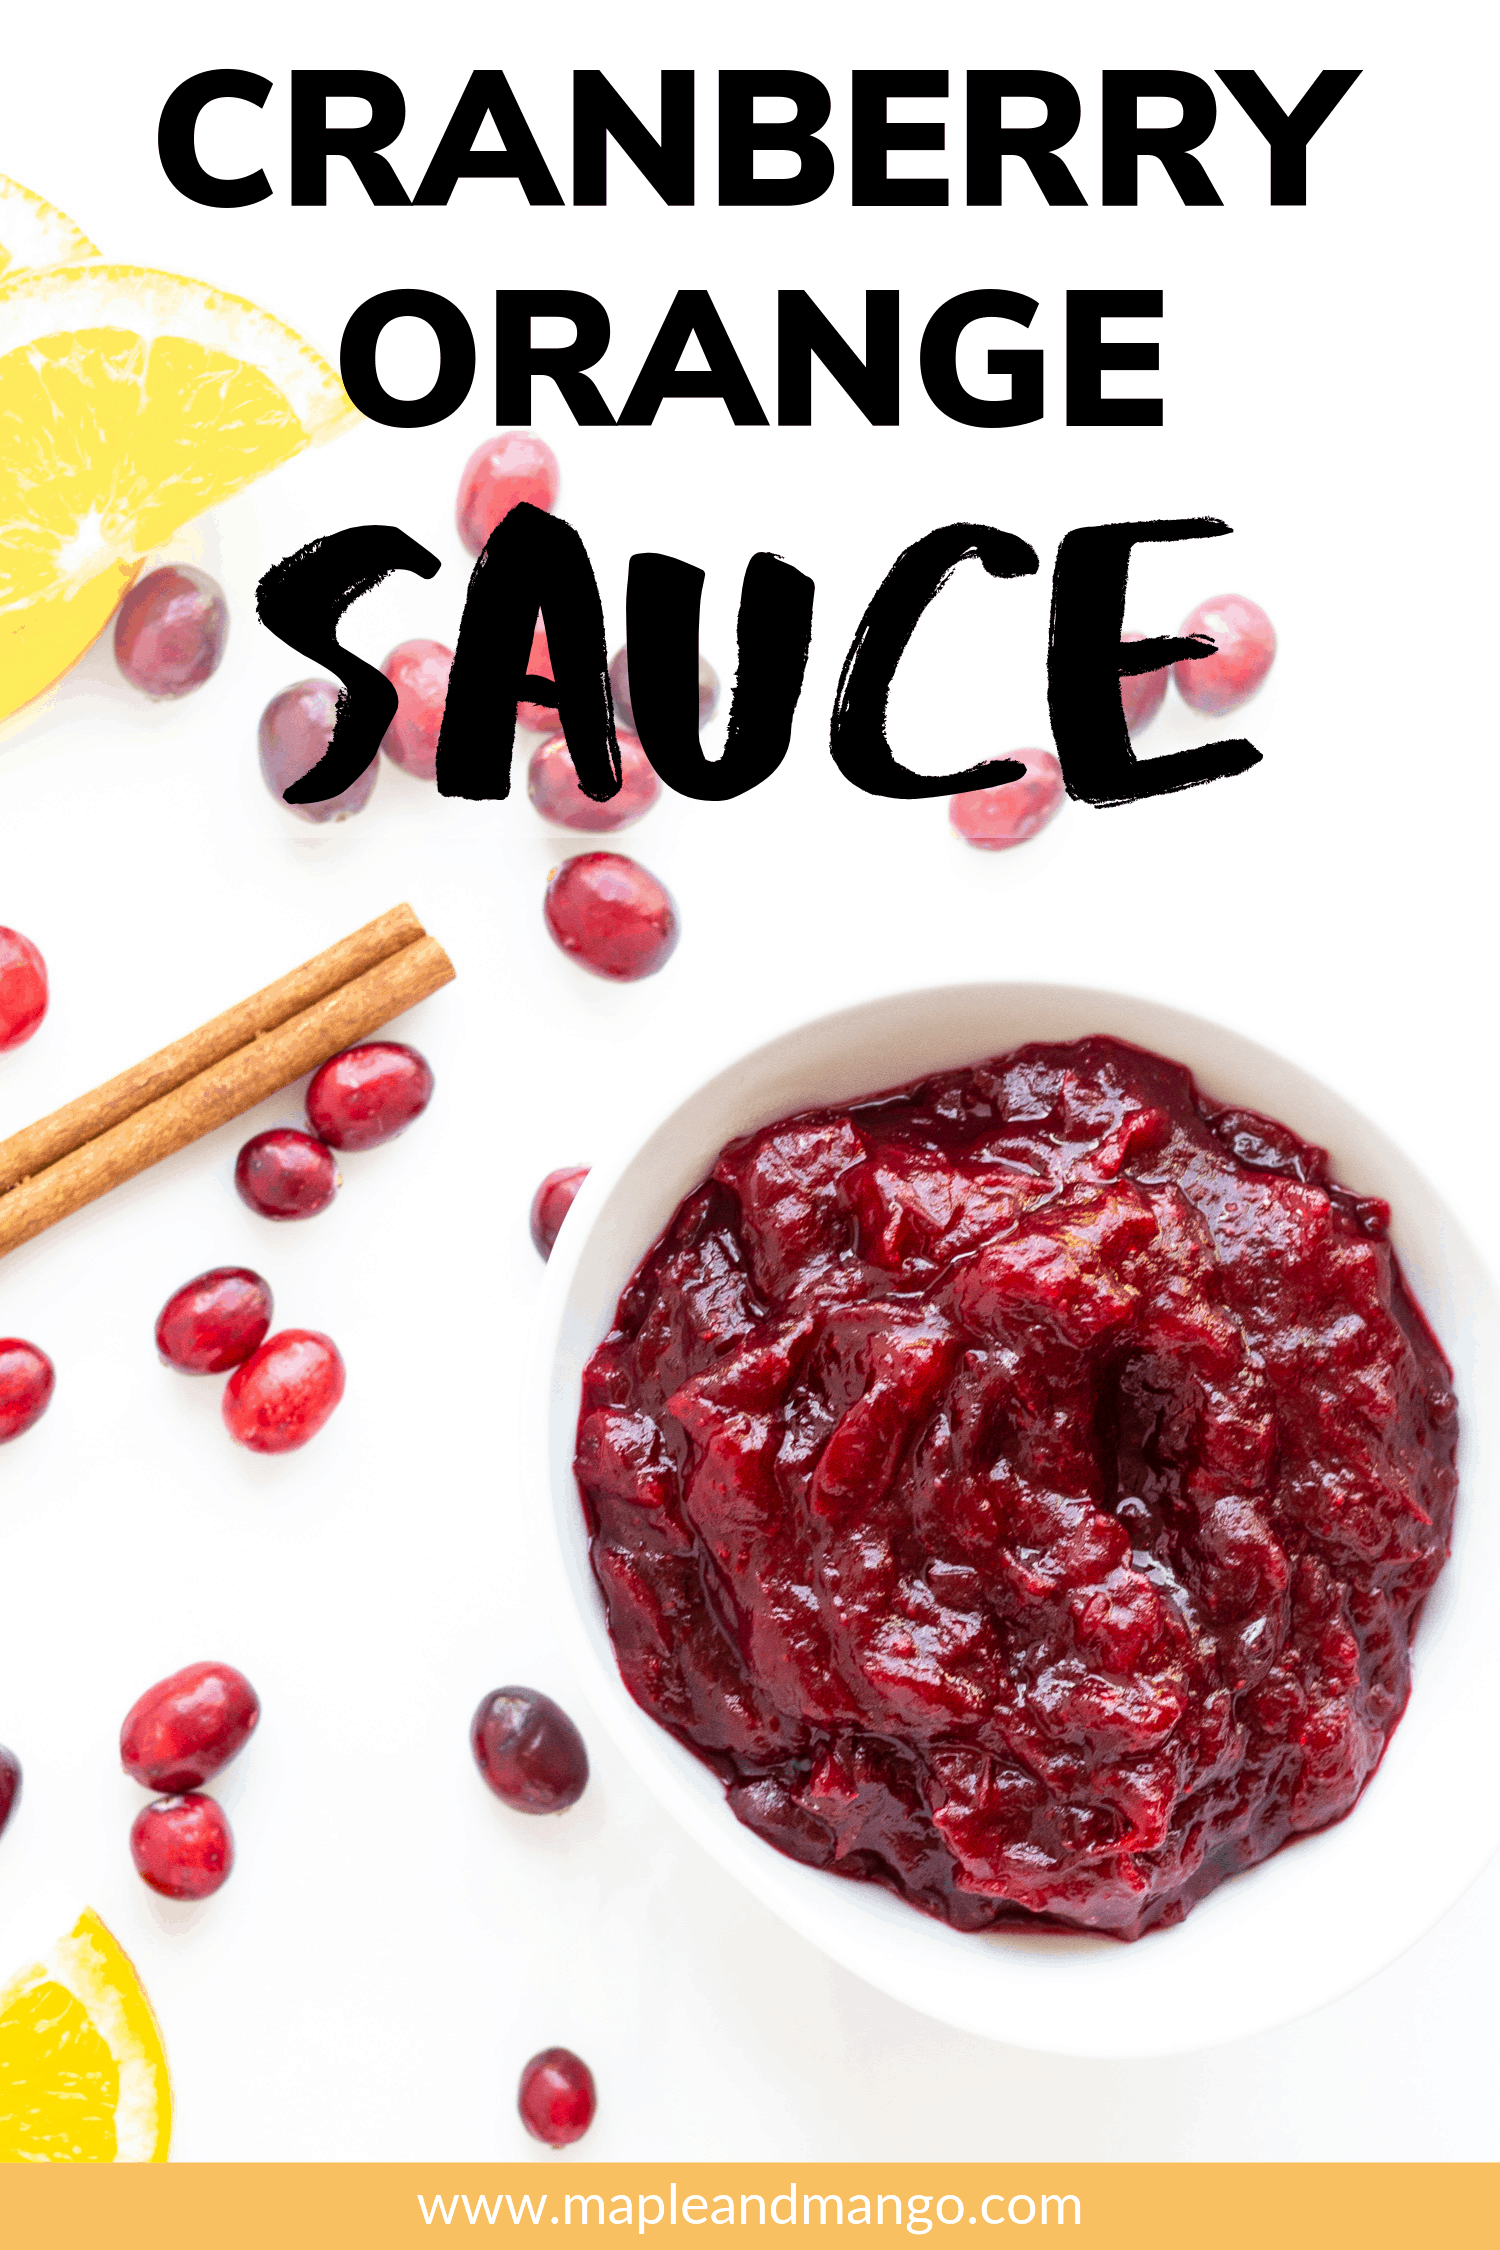 Pinterest Image for Cranberry Orange Sauce with text overlay